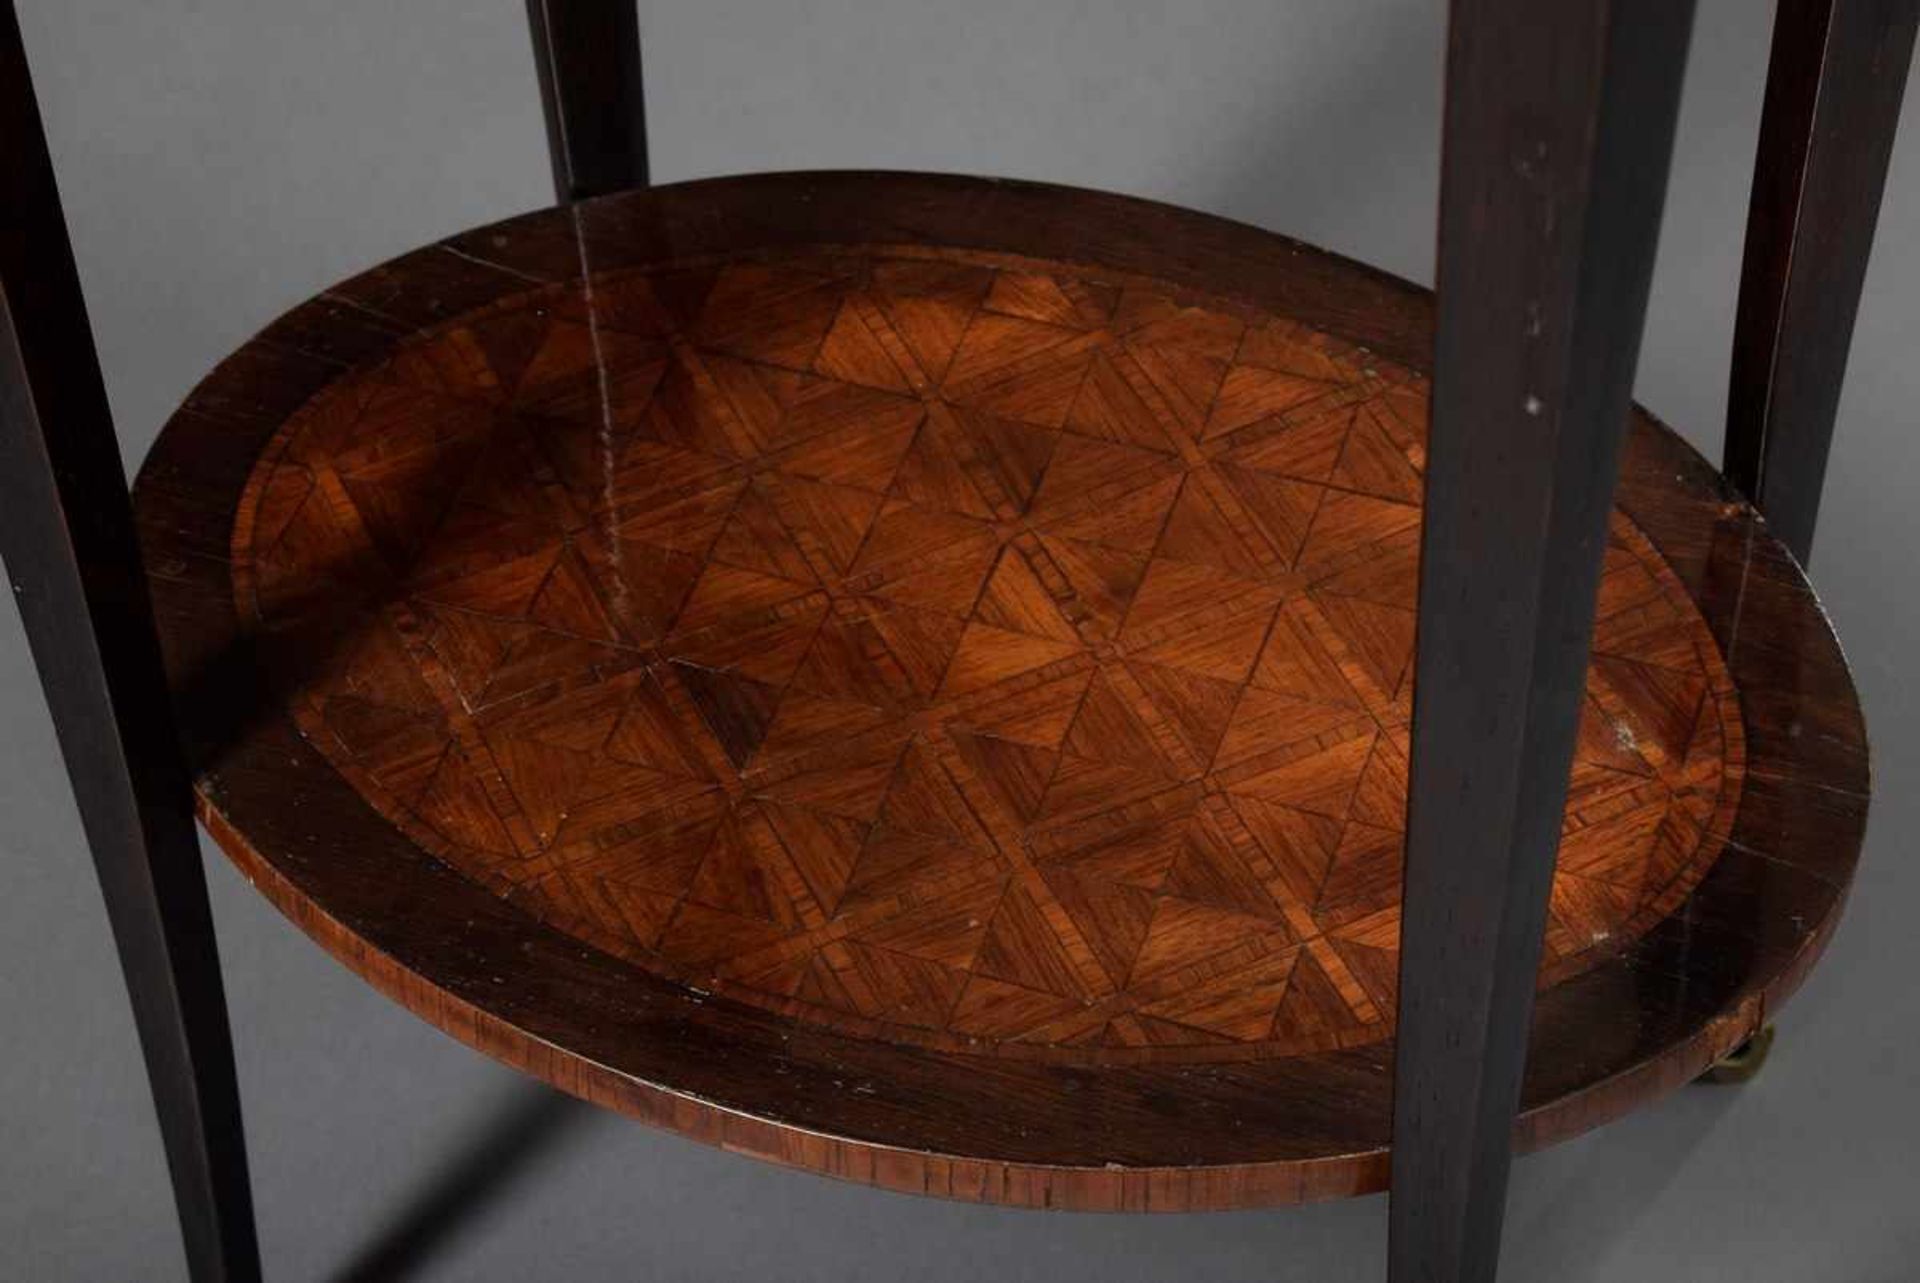 Oval "Table tricoteuse" with white-reddish marble top and optical marquetry, on curved legs with - Image 6 of 8